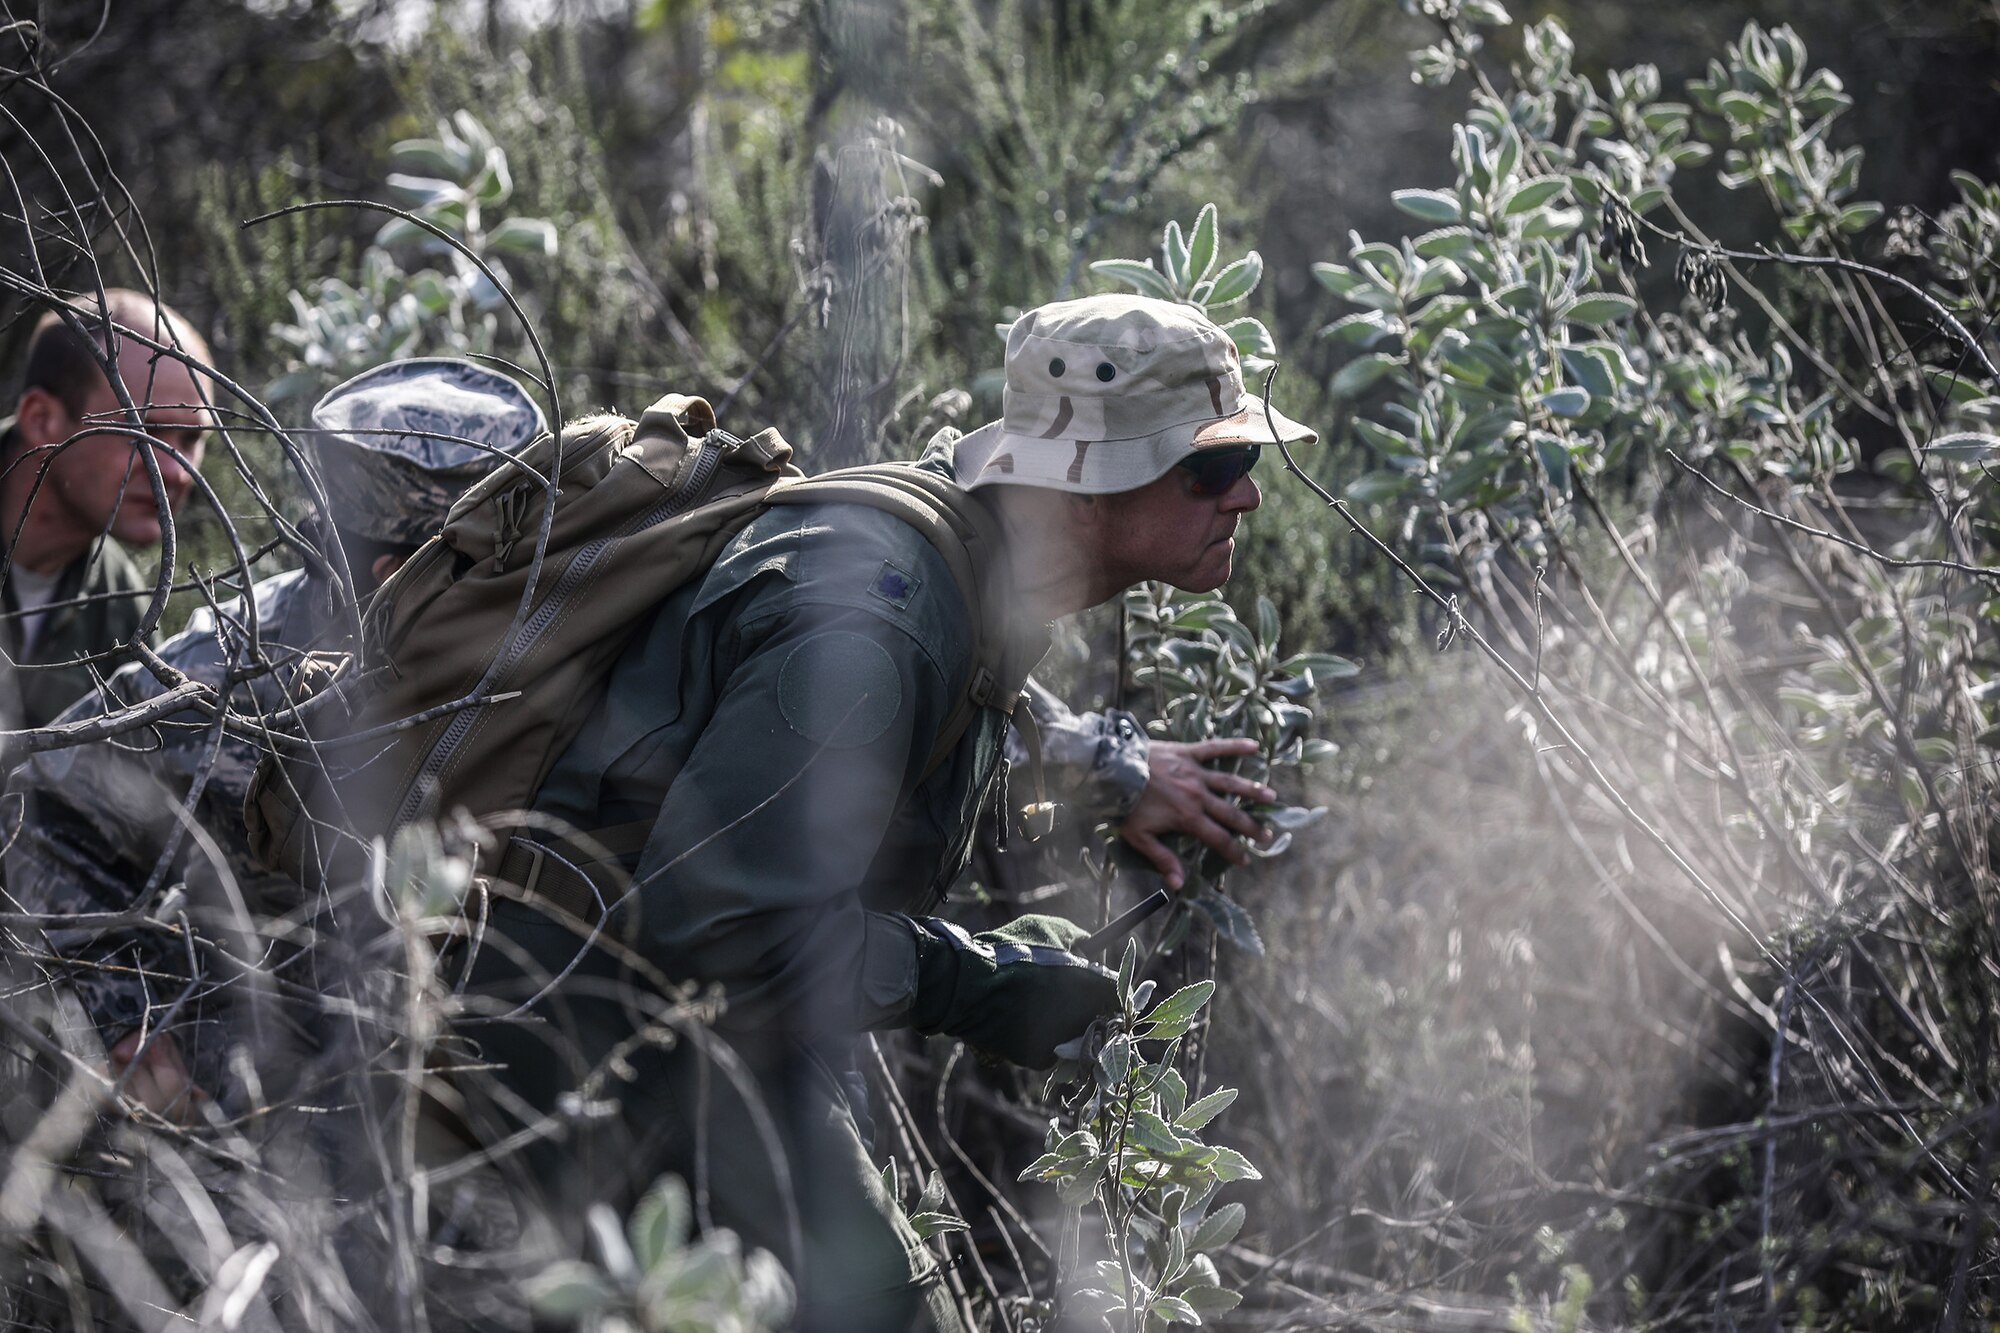 Lt. Col. Steven Shrader, 445th Operations Group deputy commander, takes cover during Evasion, Resistance and Escape (SERE) training at Naval Amphibious Base, Coronado, California, Jan. 20, 2019. Members of the 445th Airlift Wing Operations Group performed their annual training at Naval Amphibious Base, Coronado and Marine Corps Air Station Miramar near San Diego, California Jan. 18-27, 2019. The training included water survival, Survival, Evasion, Resistance and Evasion, and low altitude flying. (U.S. Air Force photo/Master Sgt. Patrick O’Reilly)